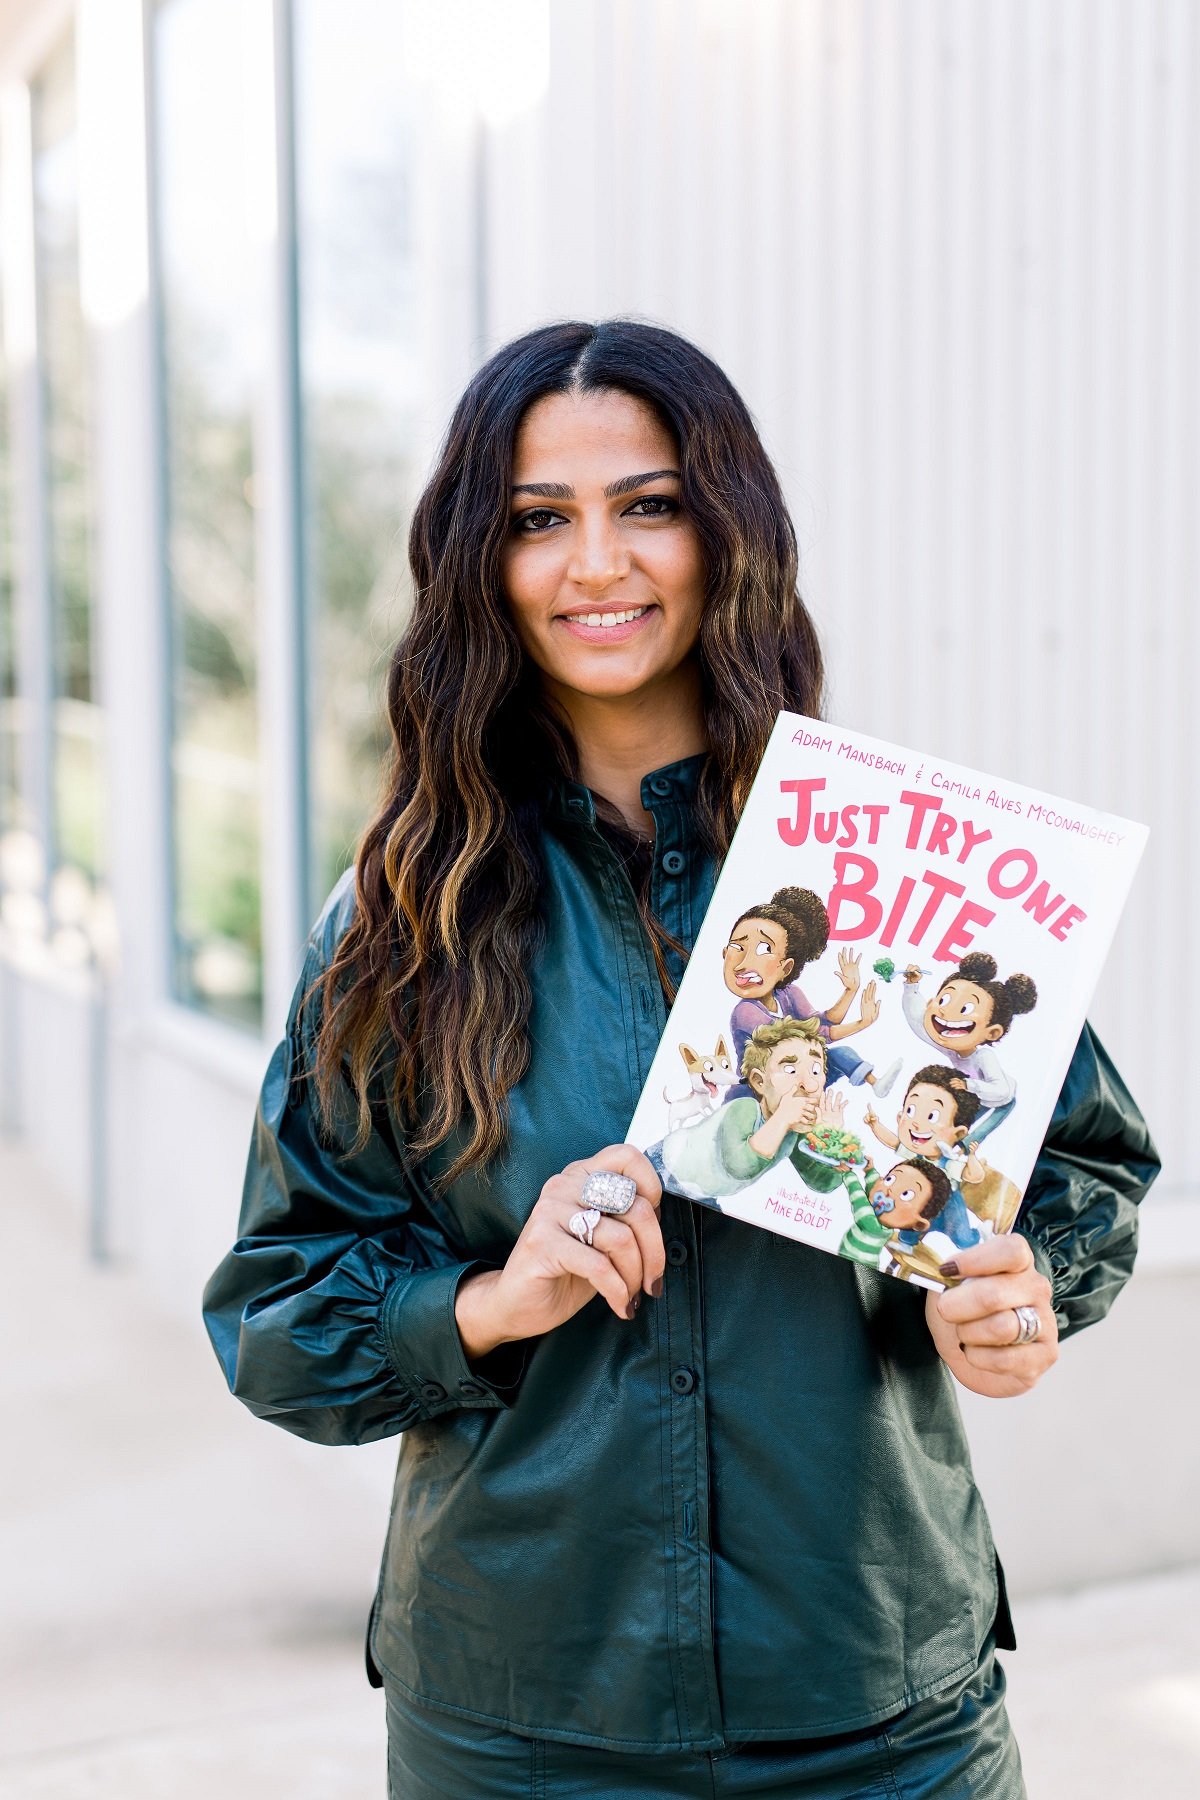 Camila Alves McConaughey holding her book "Just Try One Bite" | Source: Courtesy of Camila Alves McConaughey - Female Founders Collective